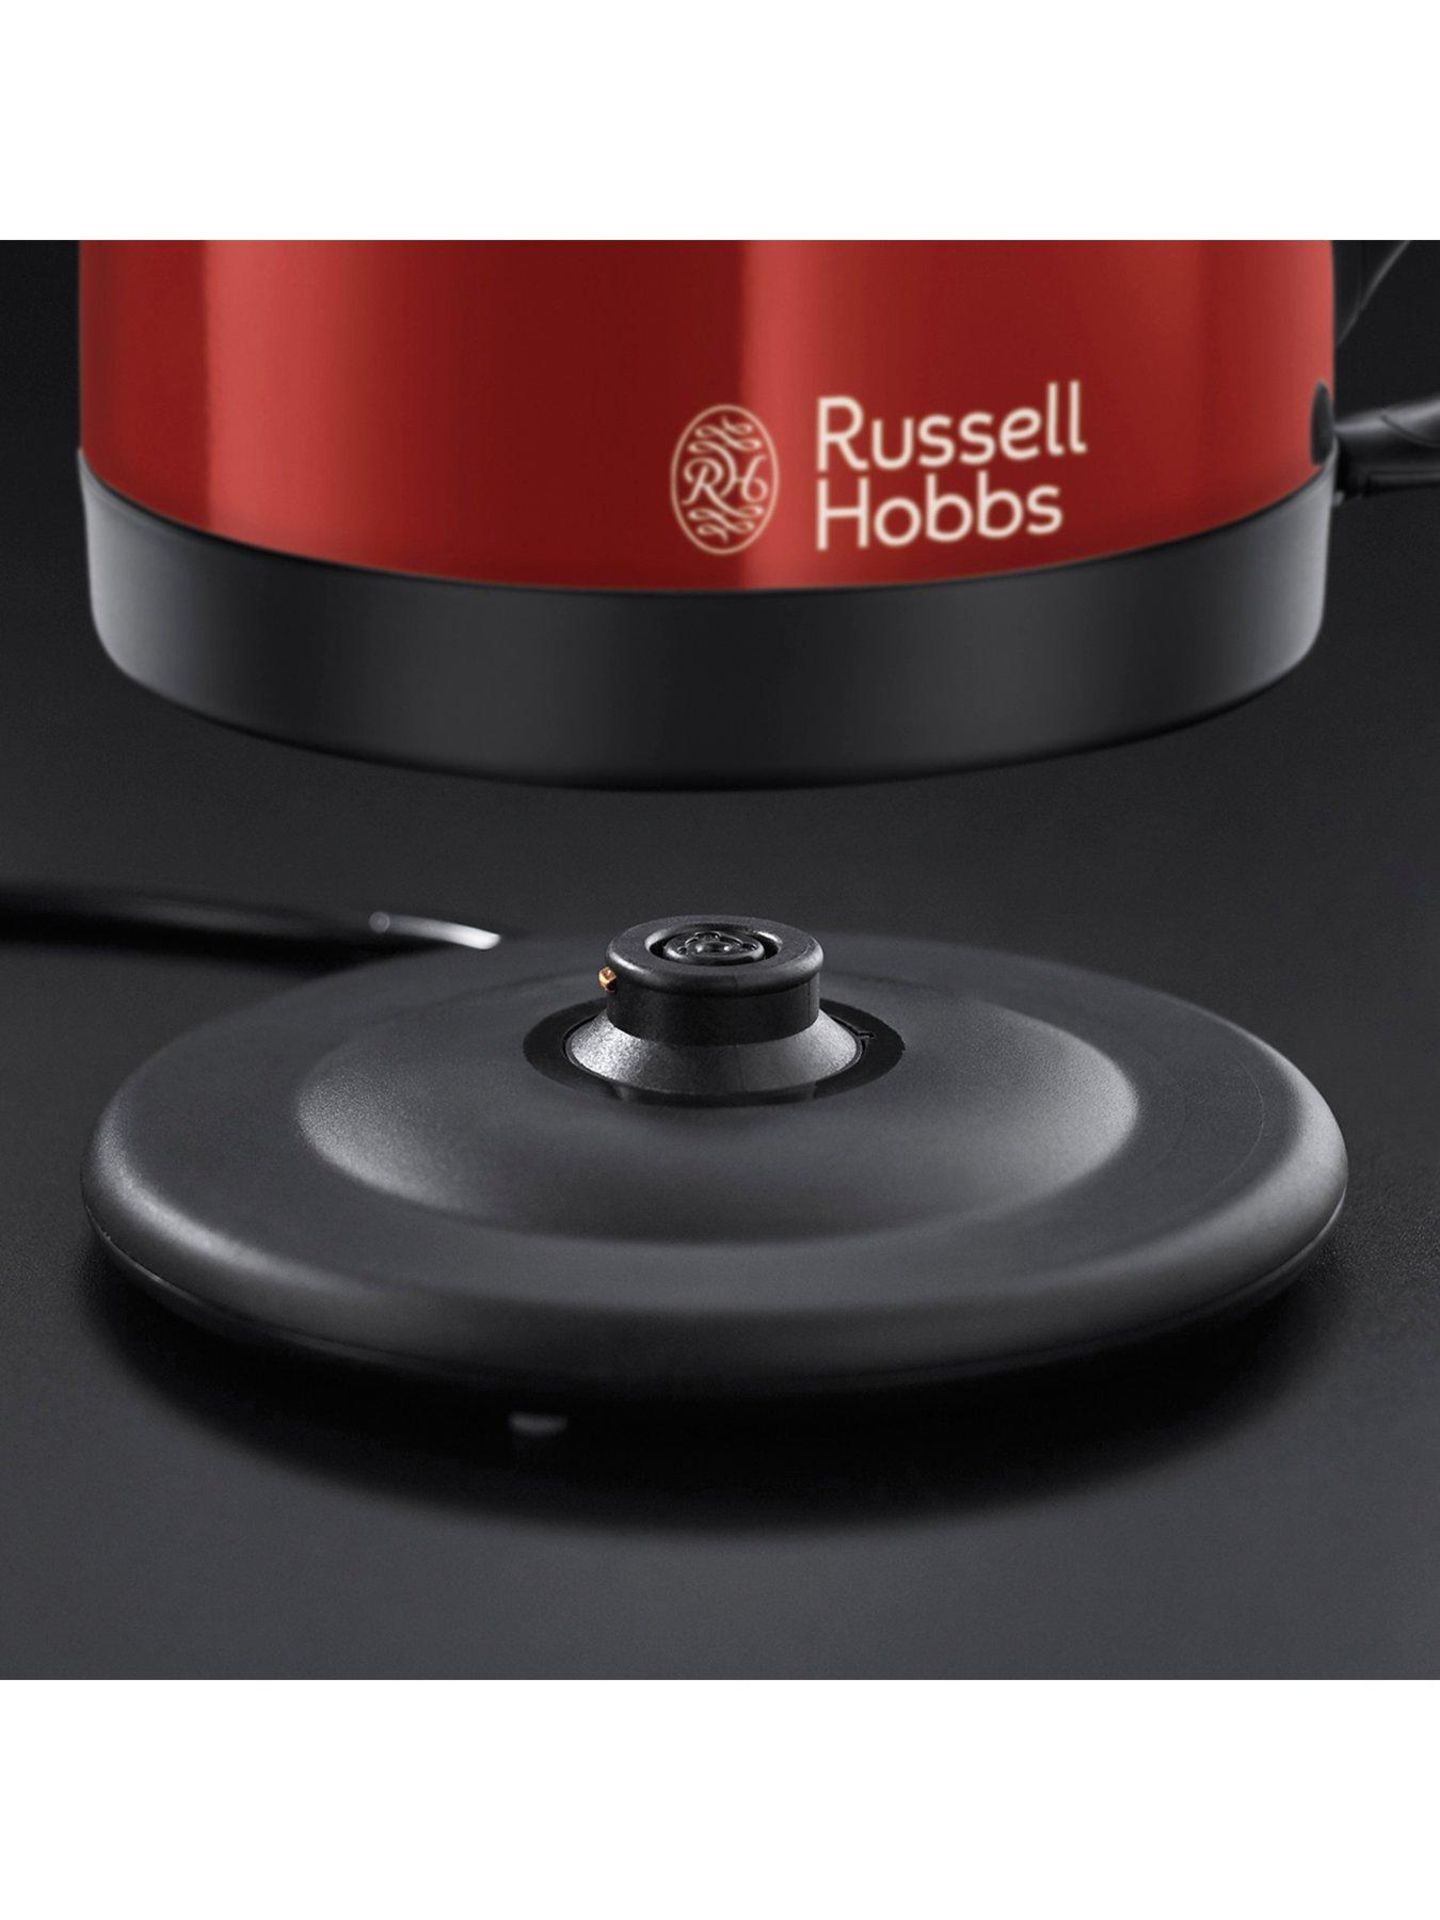 V Brand New Russel Hobbs Red Dorchester Kettle - Perfect Pour - Saves Up To 70% Energy - Littlewoods - Image 5 of 8